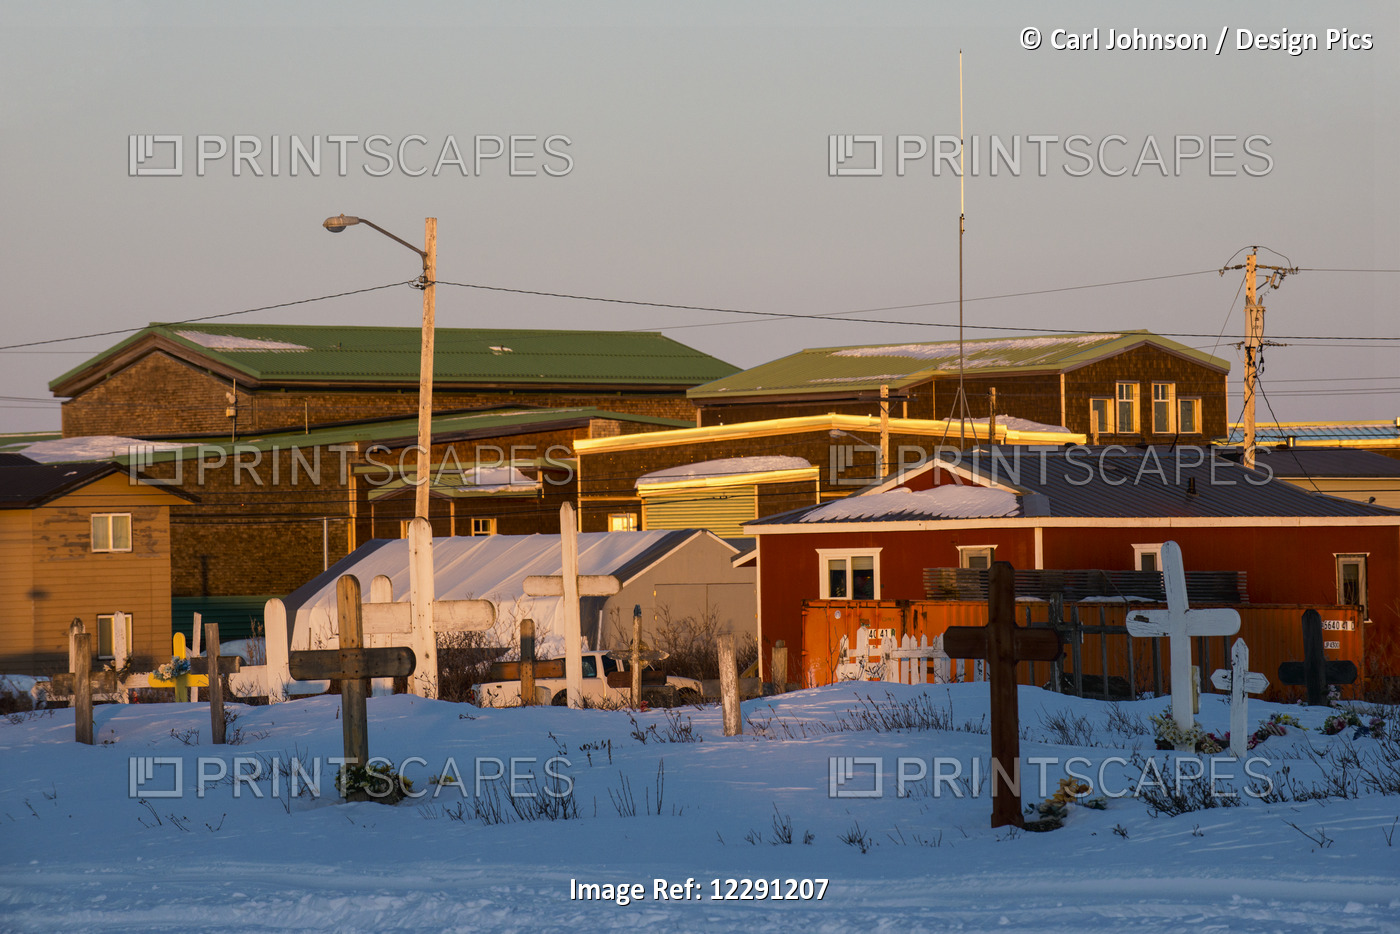 Cemetery In The Heart Of The Inupiaq Village Of Kotzebue In The Northwest ...